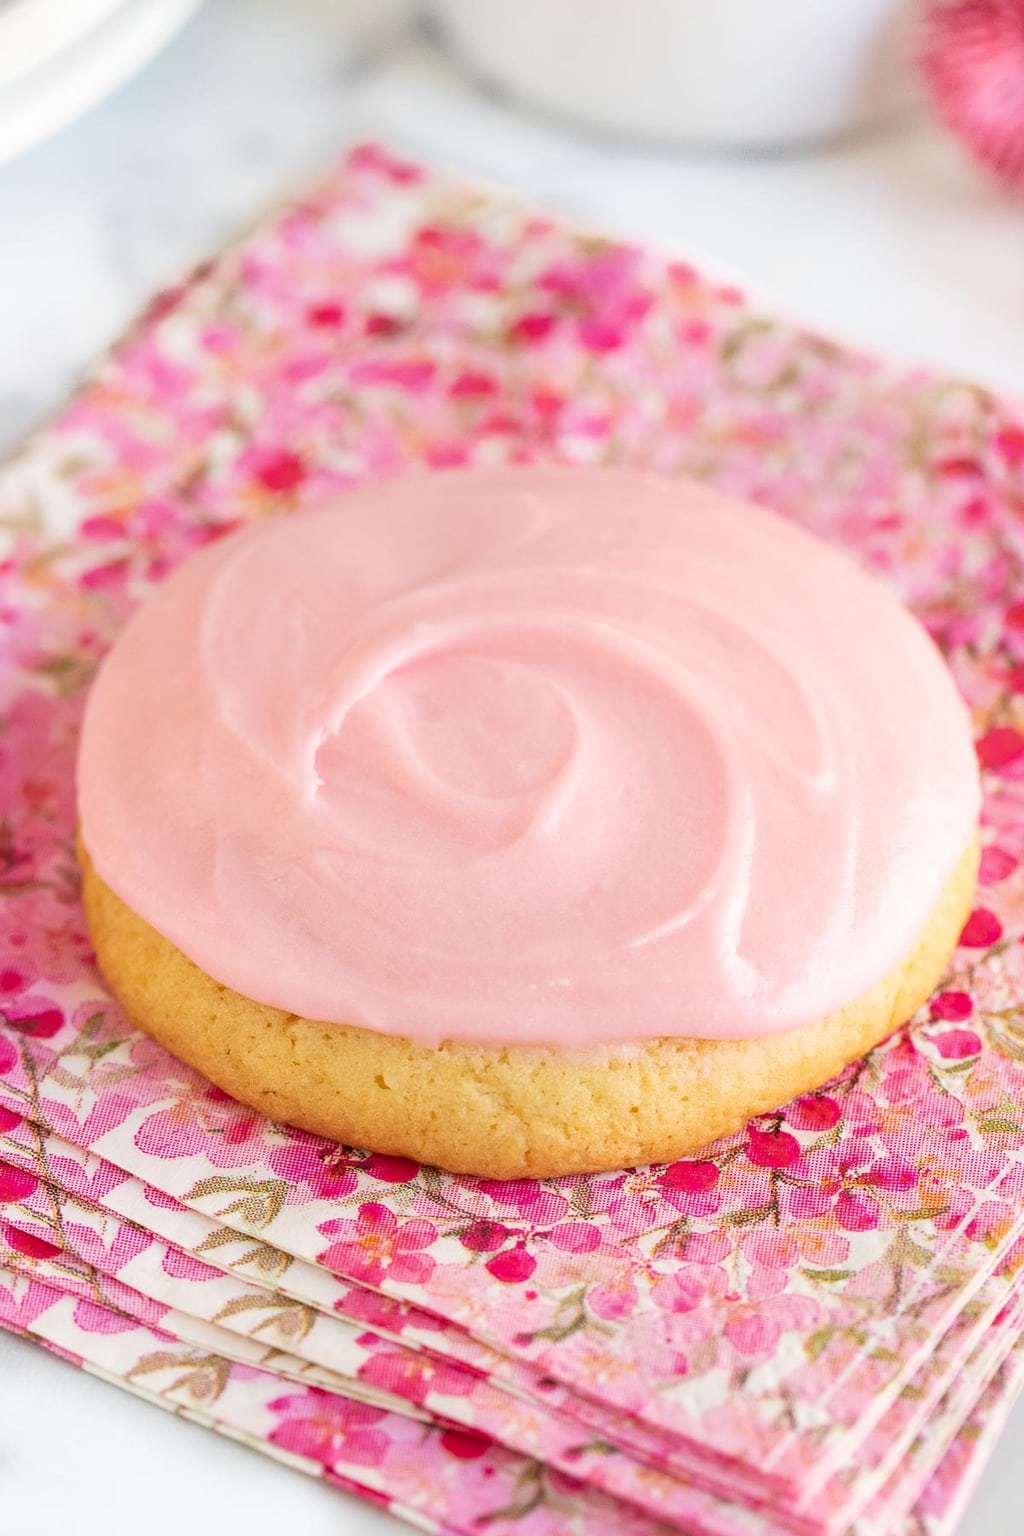 Vertical extreme closeup photo of a Copycat Crumbl Sugar Cookie on a red, pink and white patterned napkin.